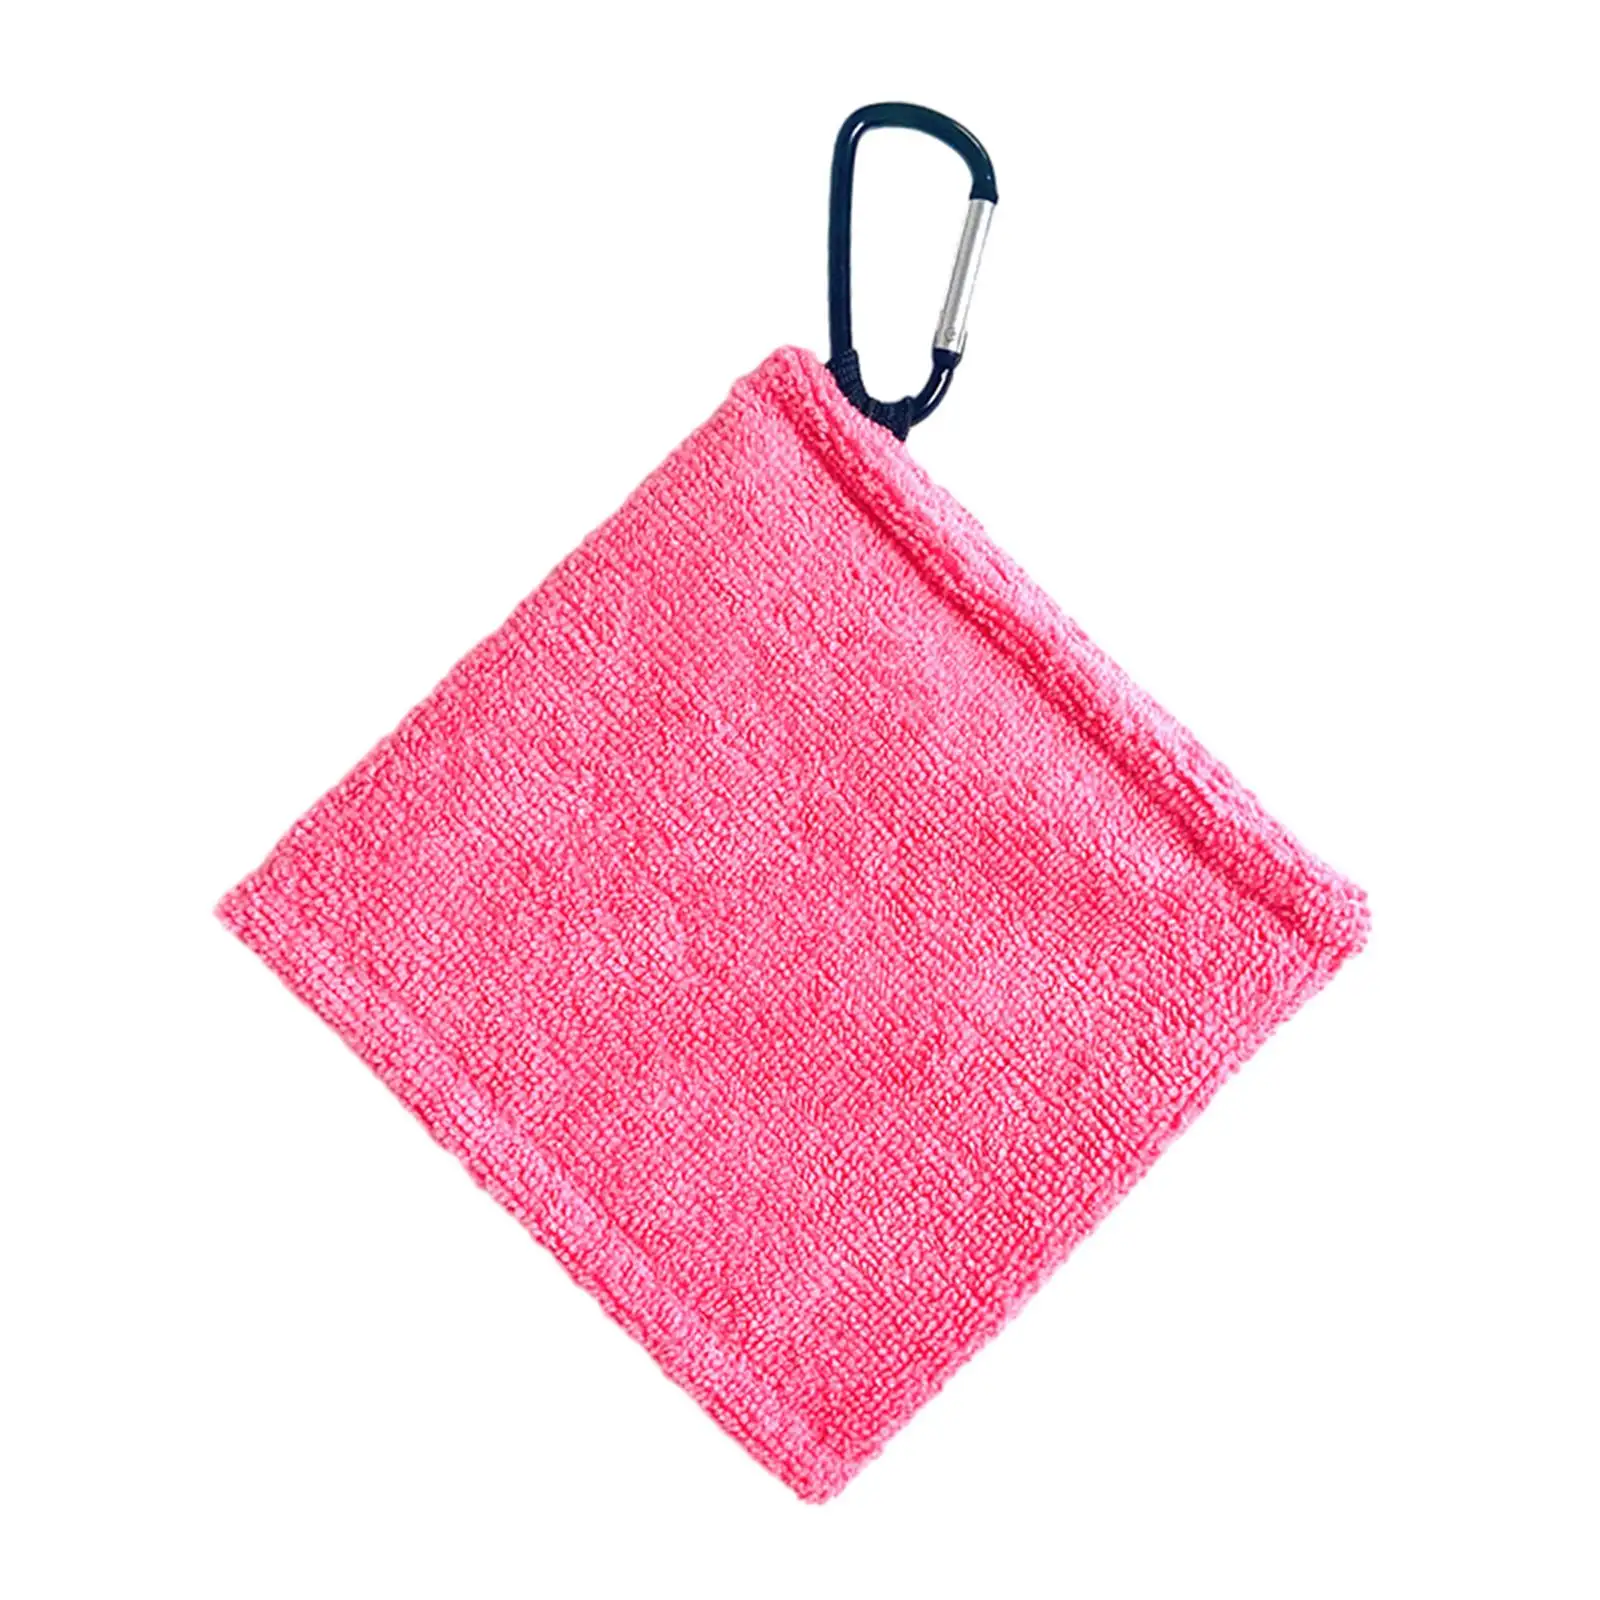 Golf Ball Towel with Clip, Wiping Cloth, Golf Ball Cleaning Towel, Golf Ball Cleaner Pocket